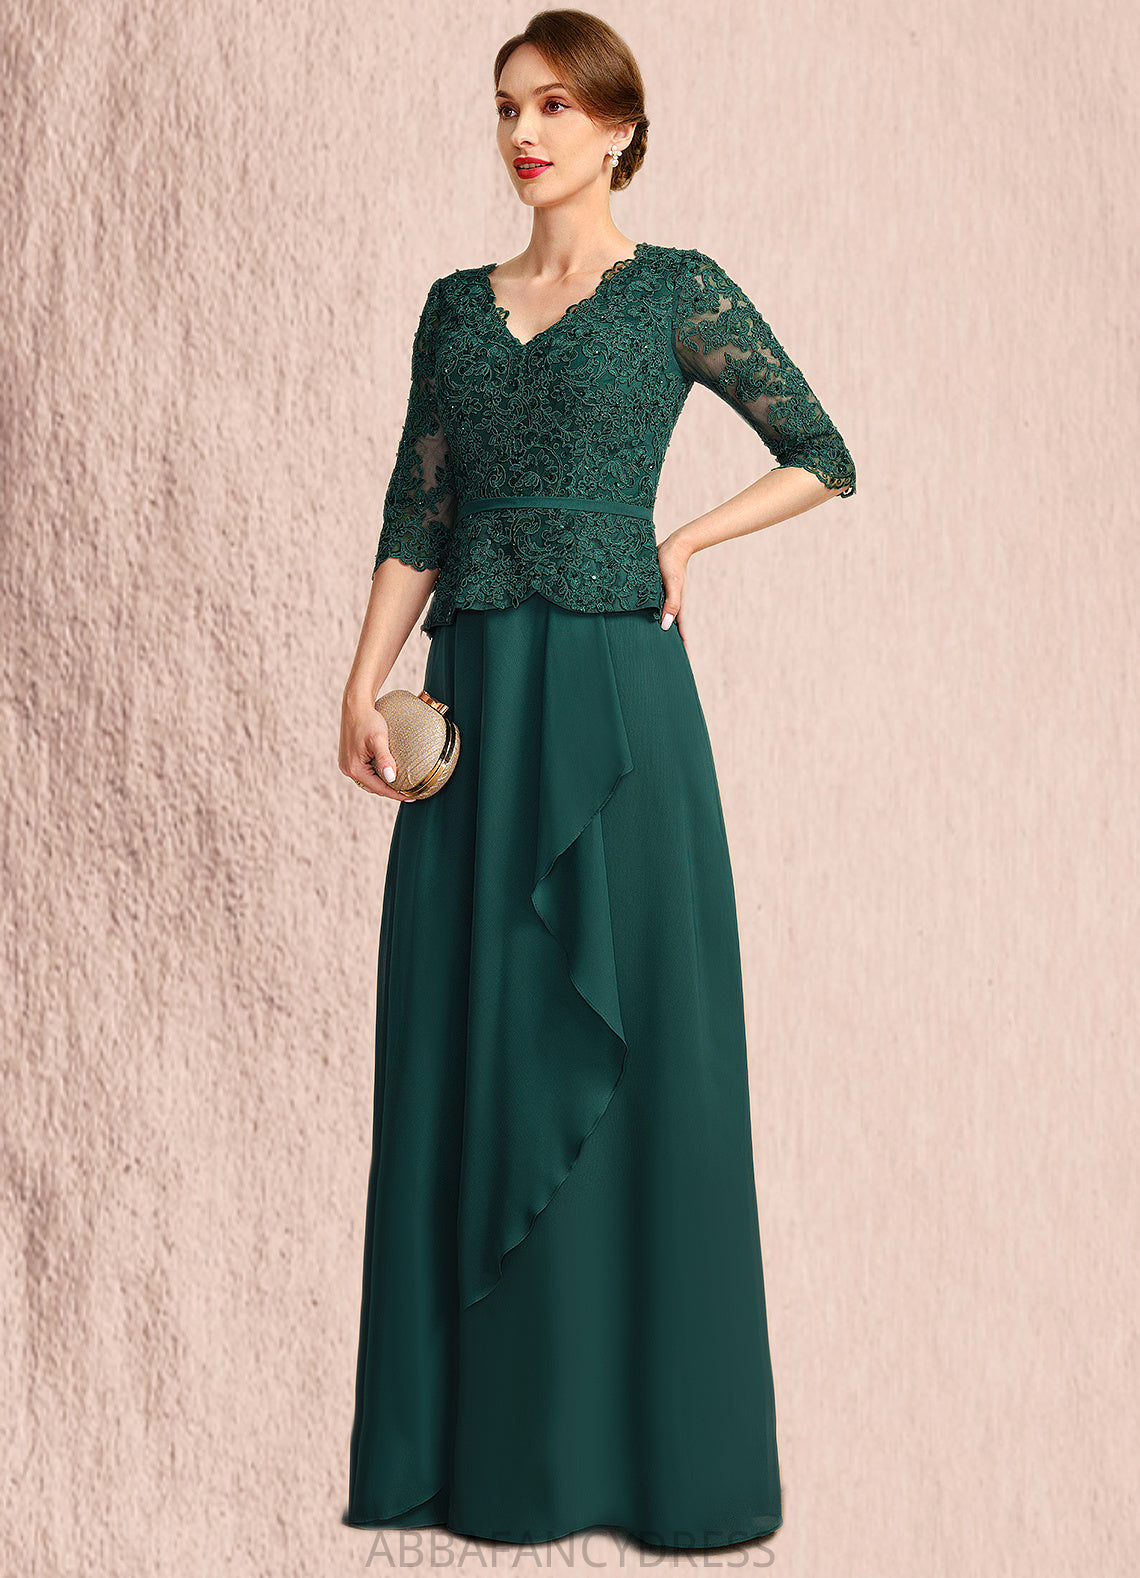 Adelaide A-line V-Neck Floor-Length Chiffon Lace Mother of the Bride Dress With Cascading Ruffles Sequins DRP0021934